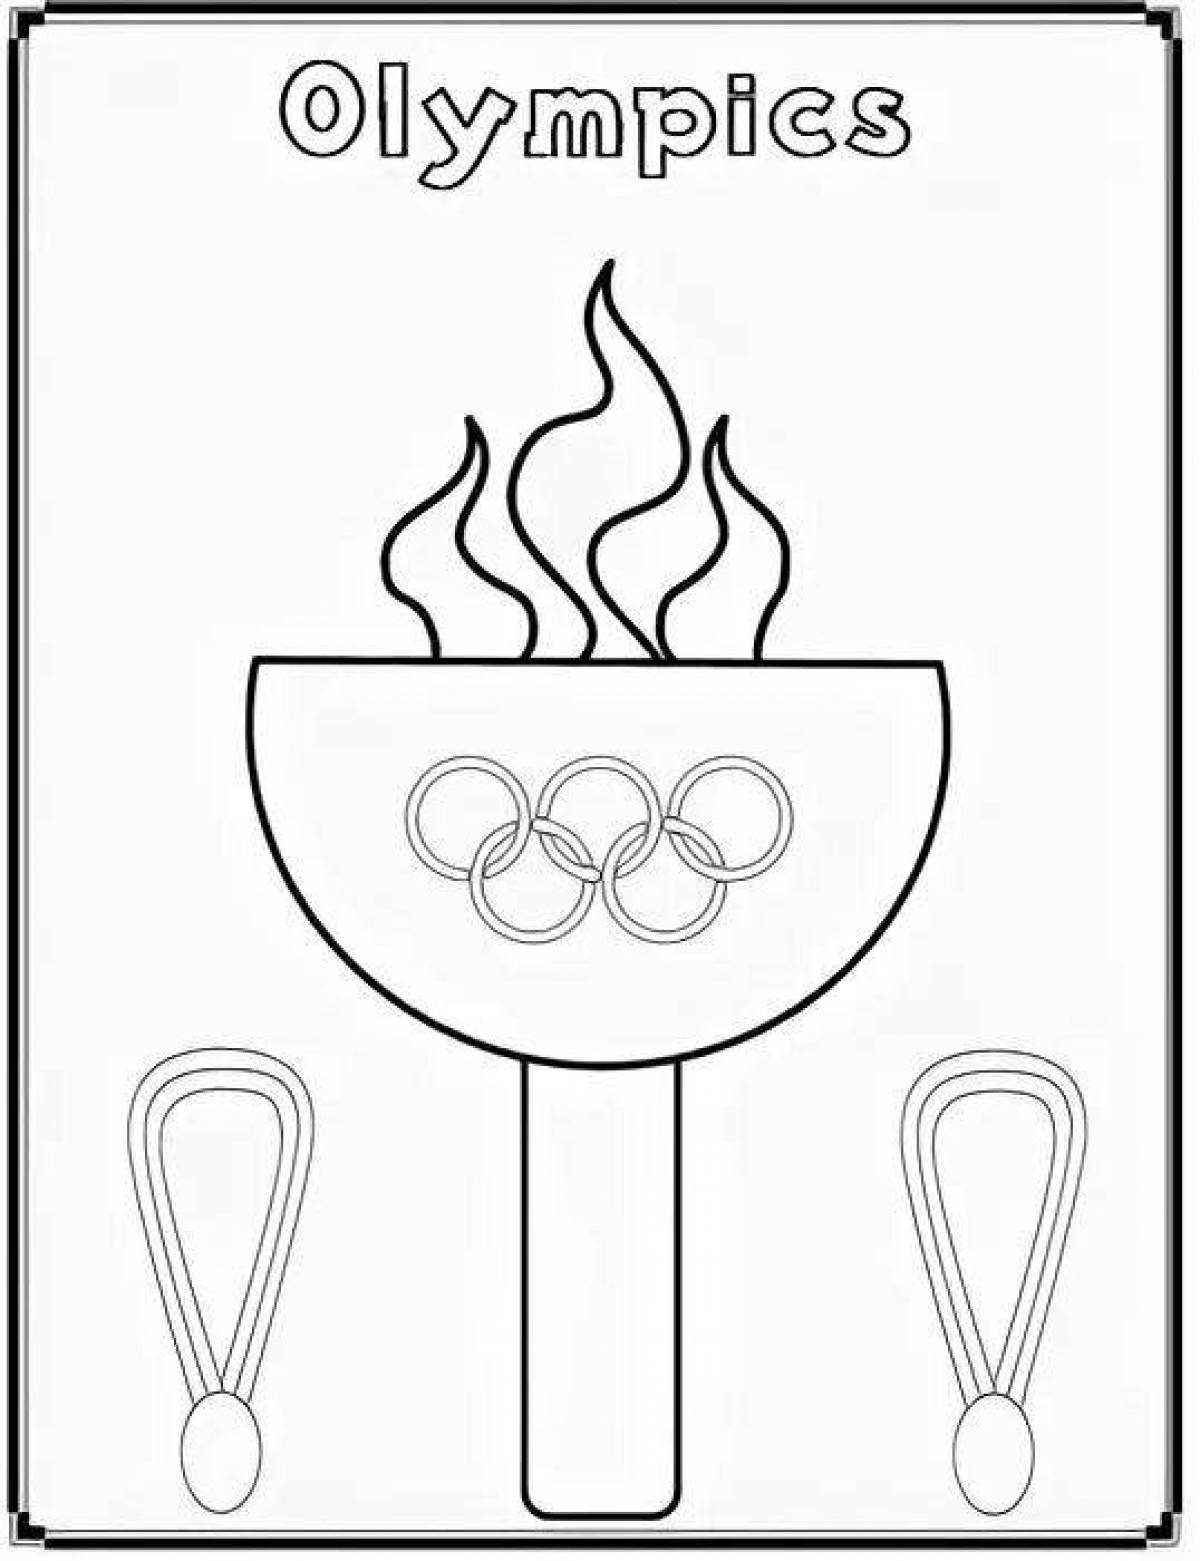 Olympic fire awesome coloring book